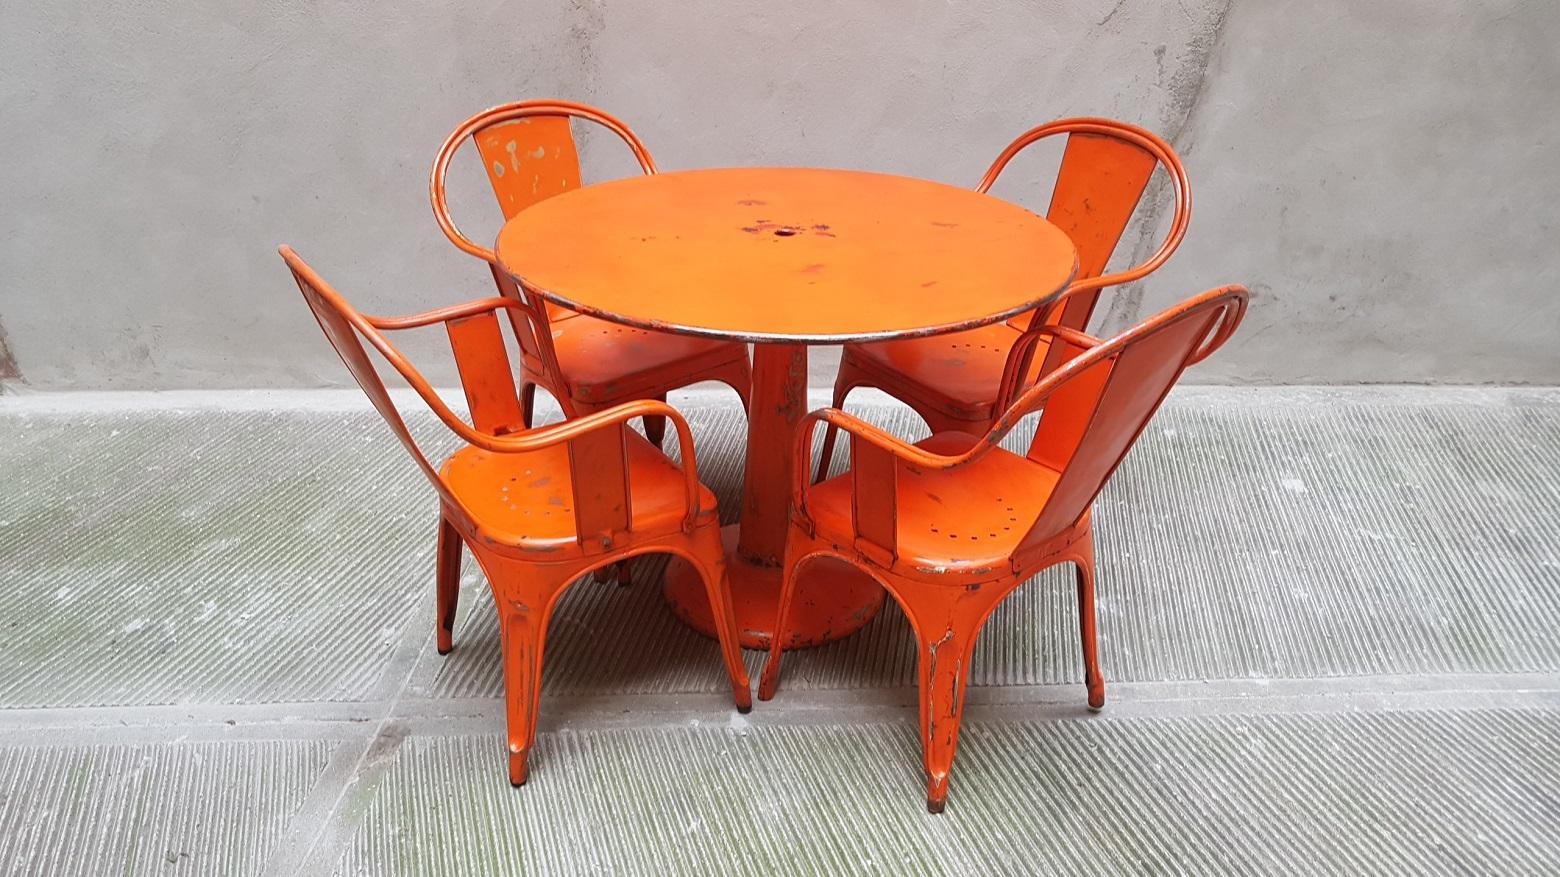 Mid-20th Century French Bistrot Metal Tolix Model C Chairs, 1940-1950 For Sale 1